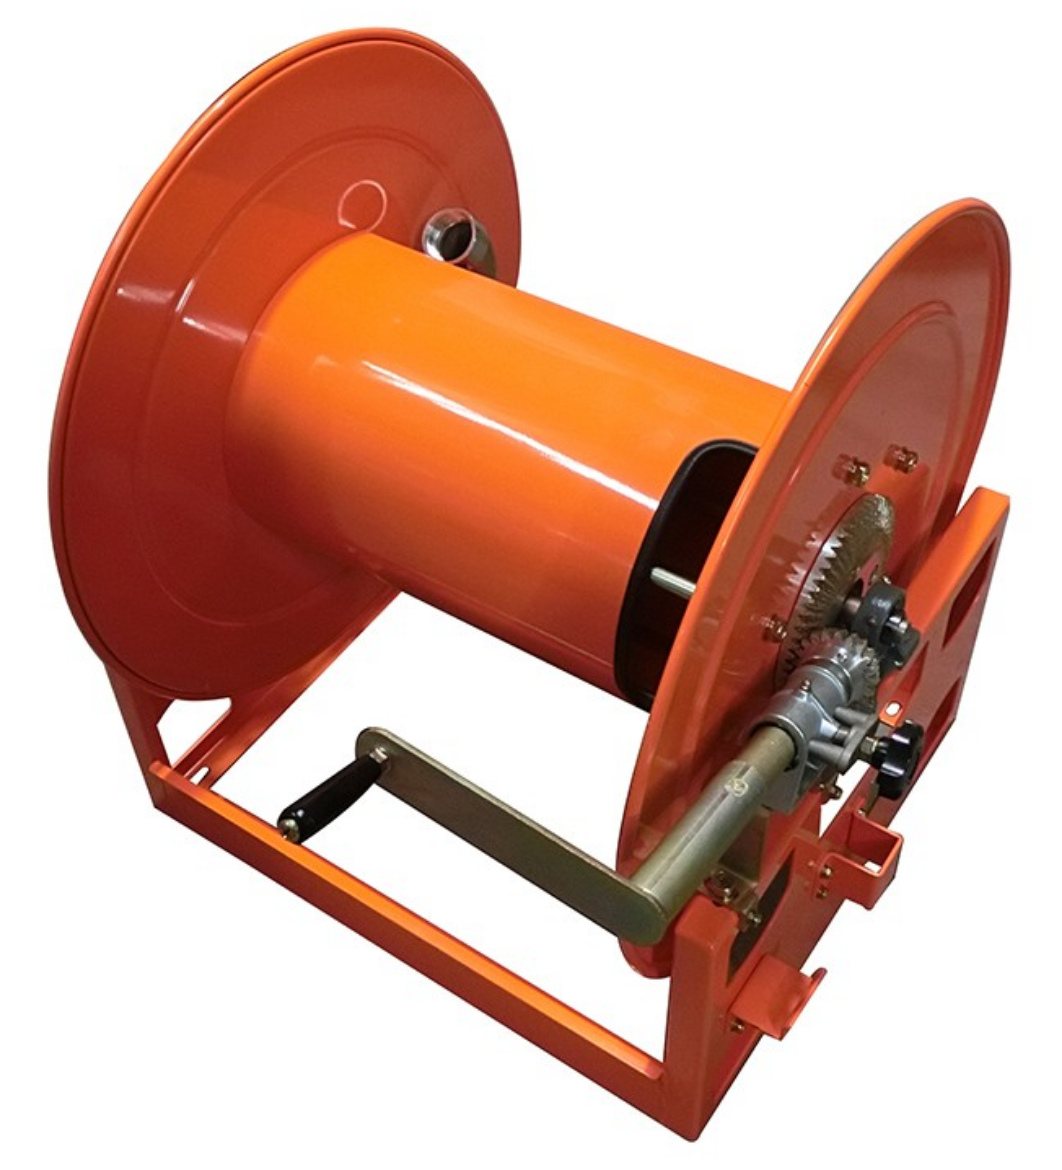 Picture of FUEL  HOSE REEL  1-1/2" X 30M MANUAL REWIND 1000PSI - NO HOSE, NO FITTINGS